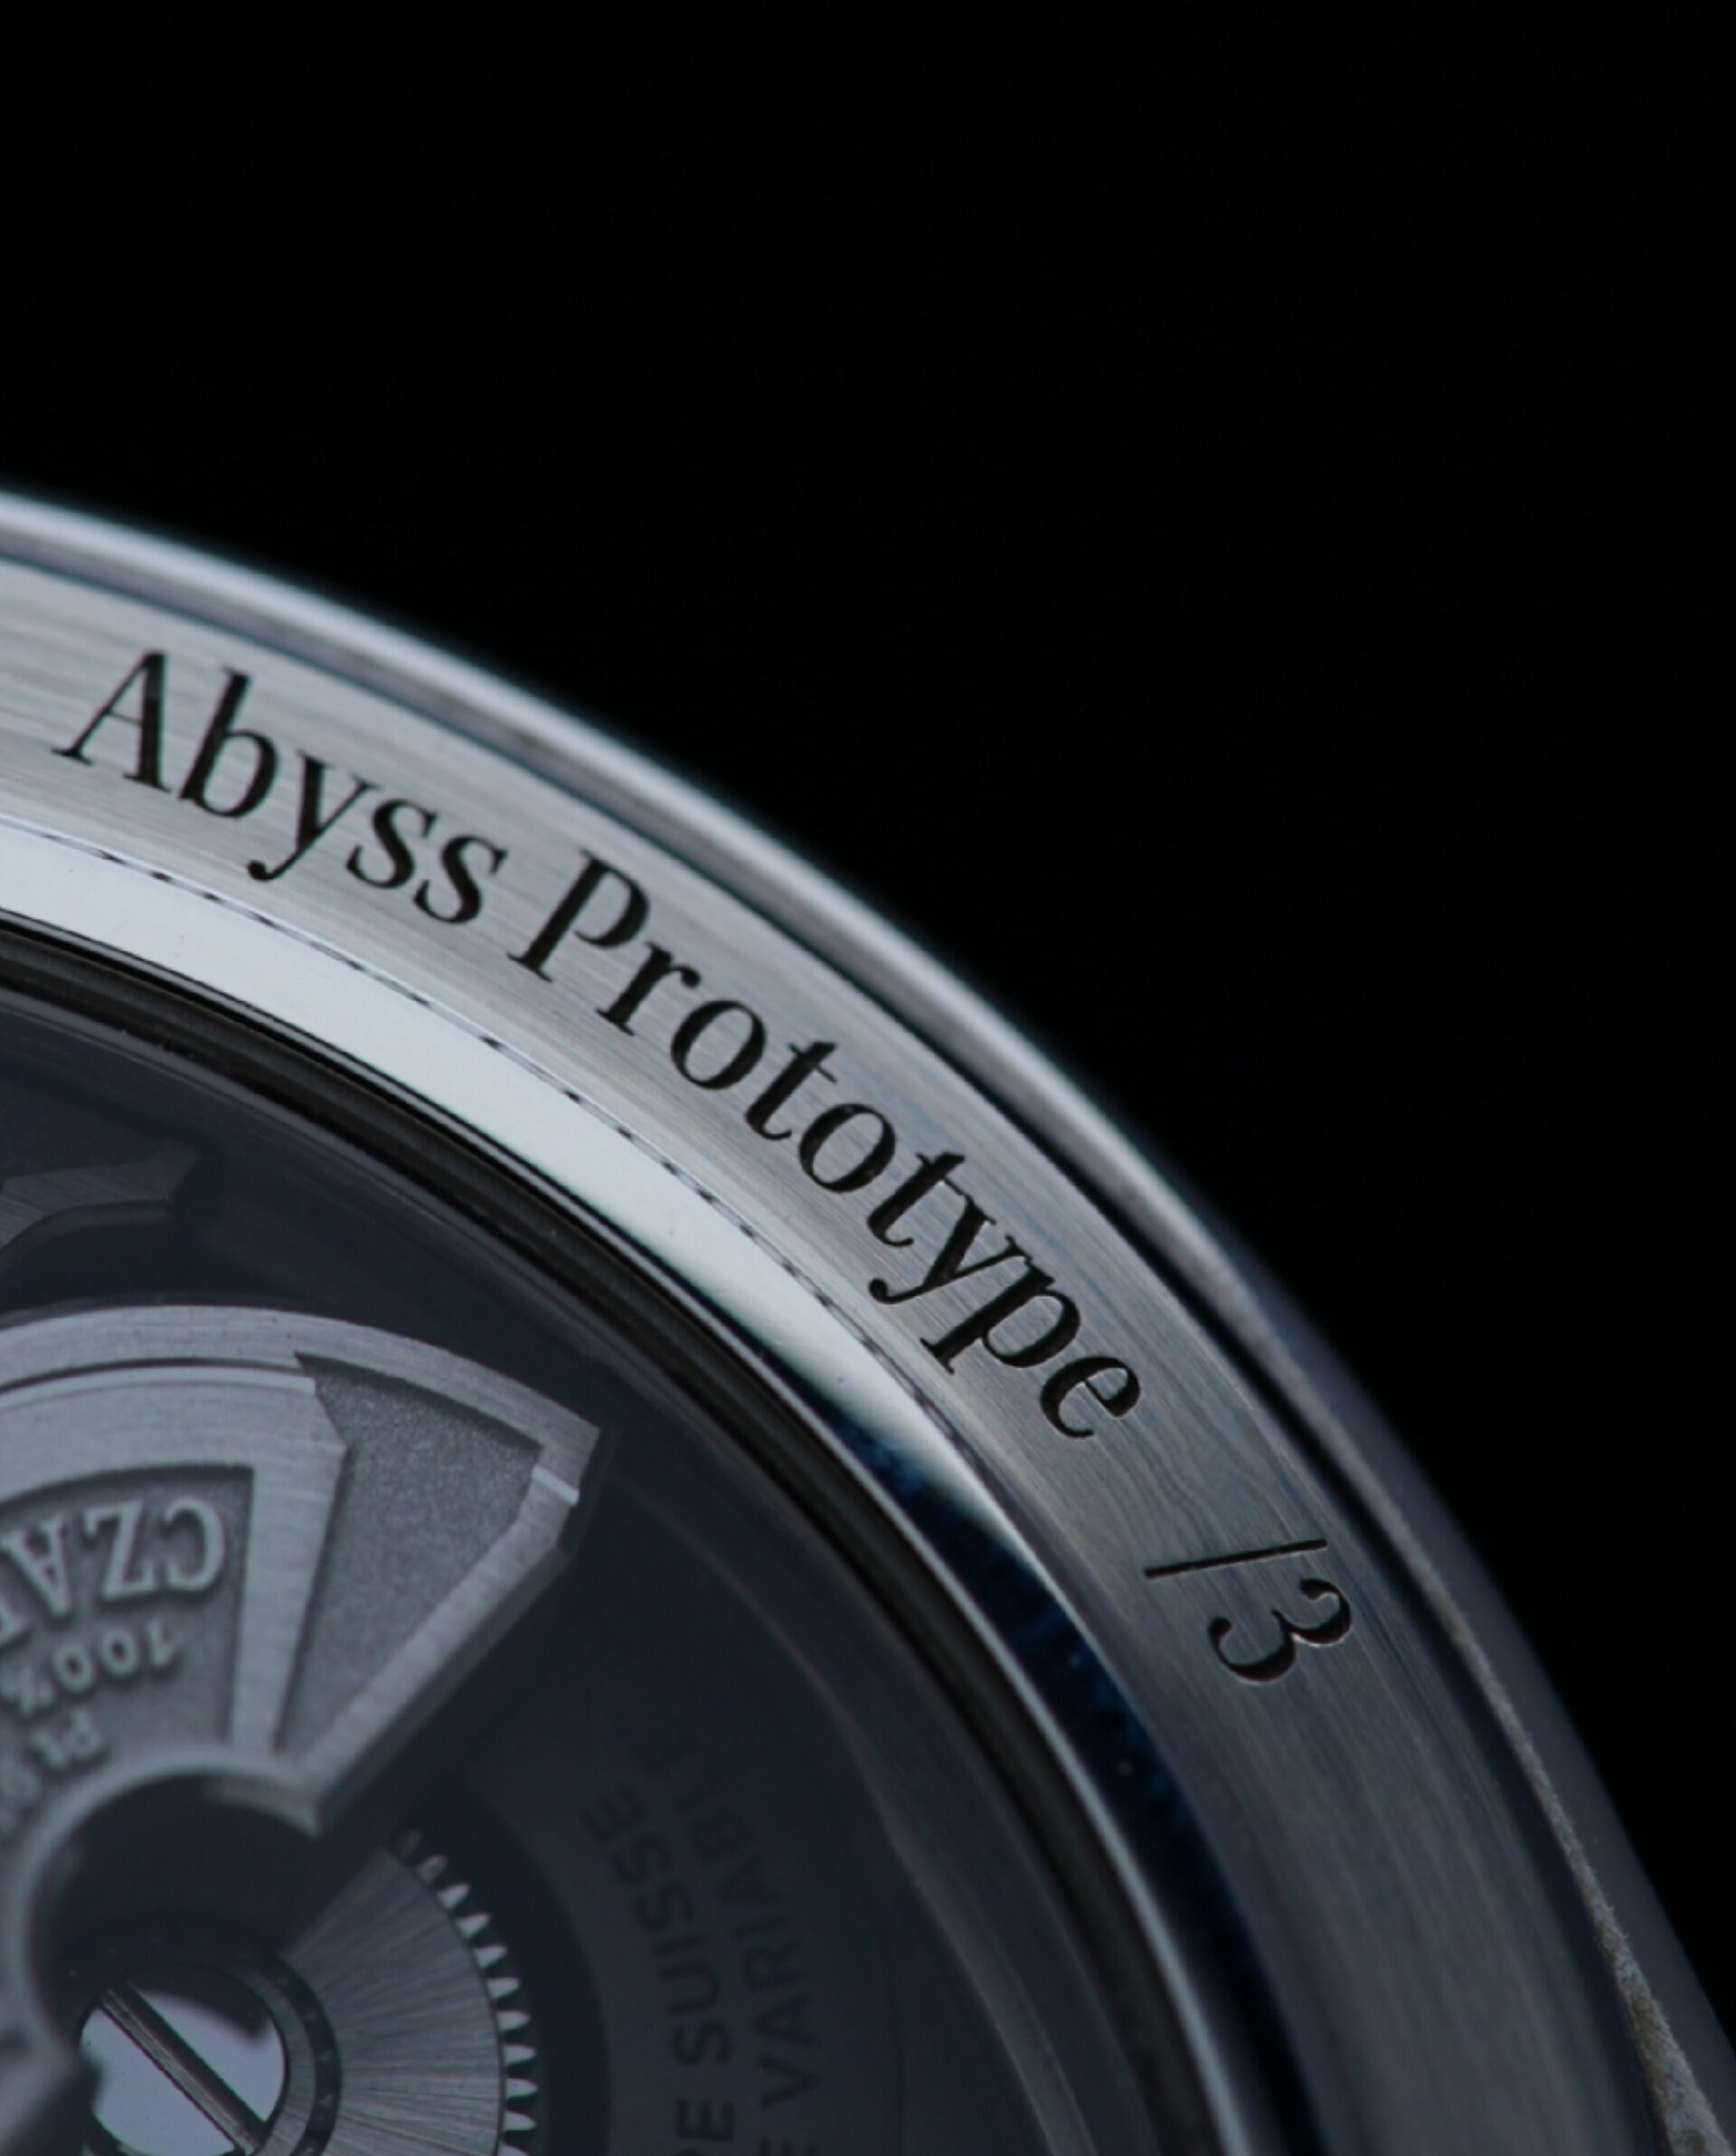 Back side of case of the Antarctique Abyss PROTOTYPE watch.